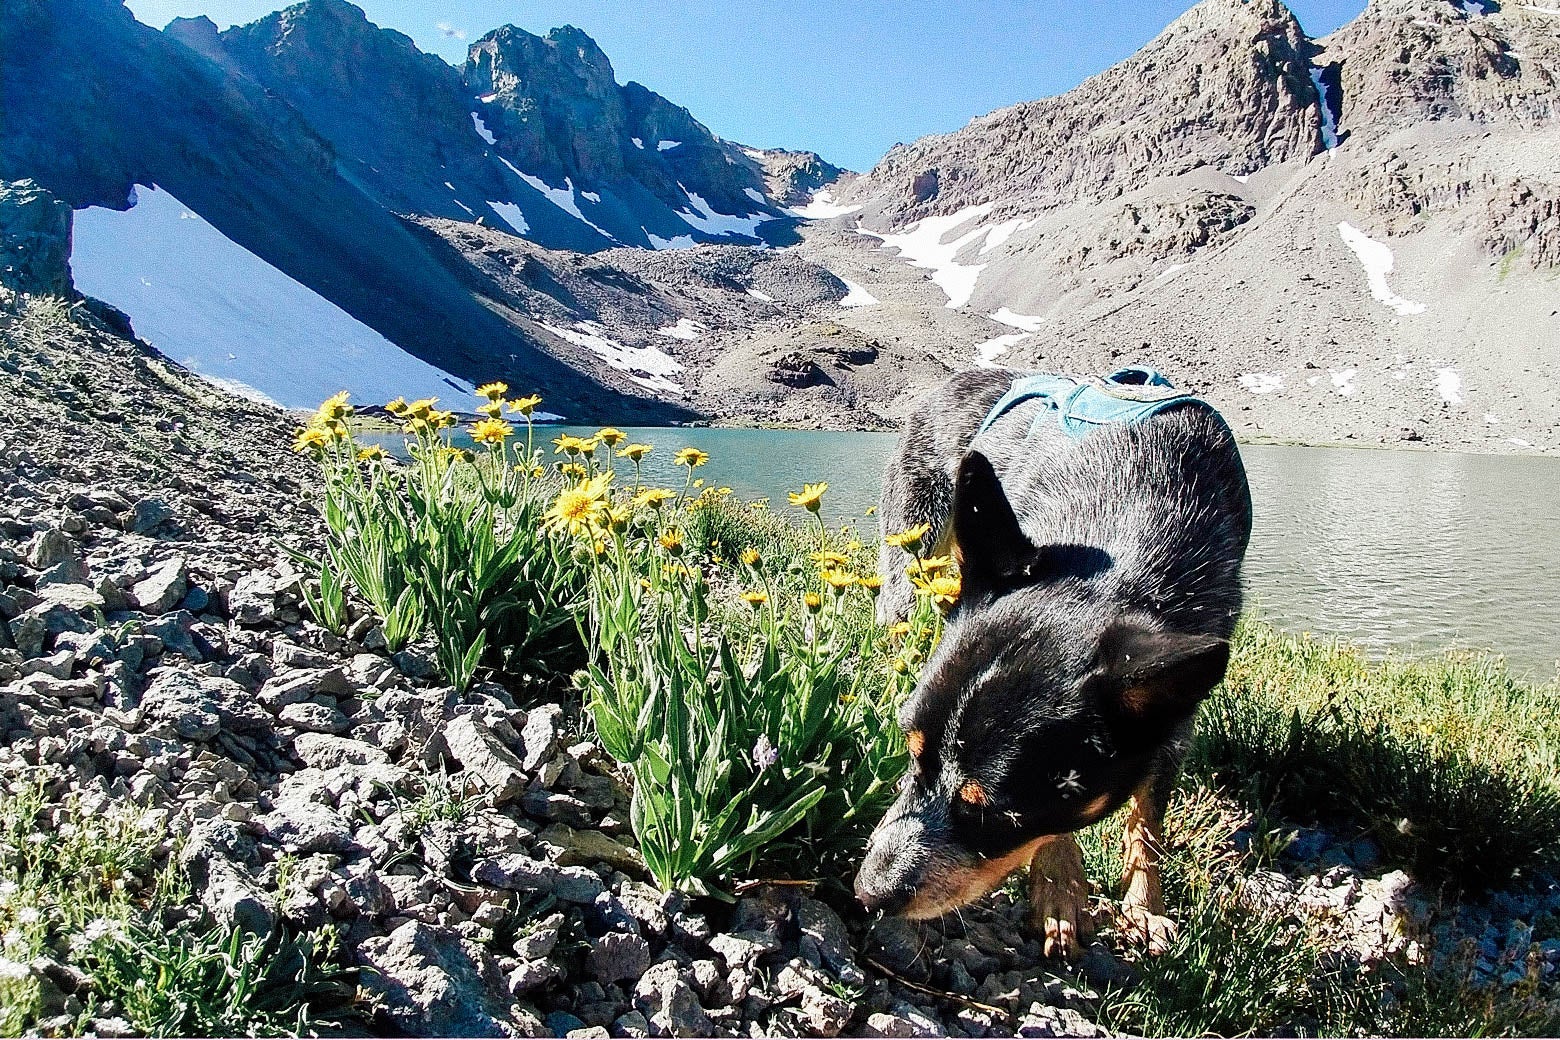 A black-and-brown dog sniff around the base of some yellow wildflowers in front of an alpine lake.